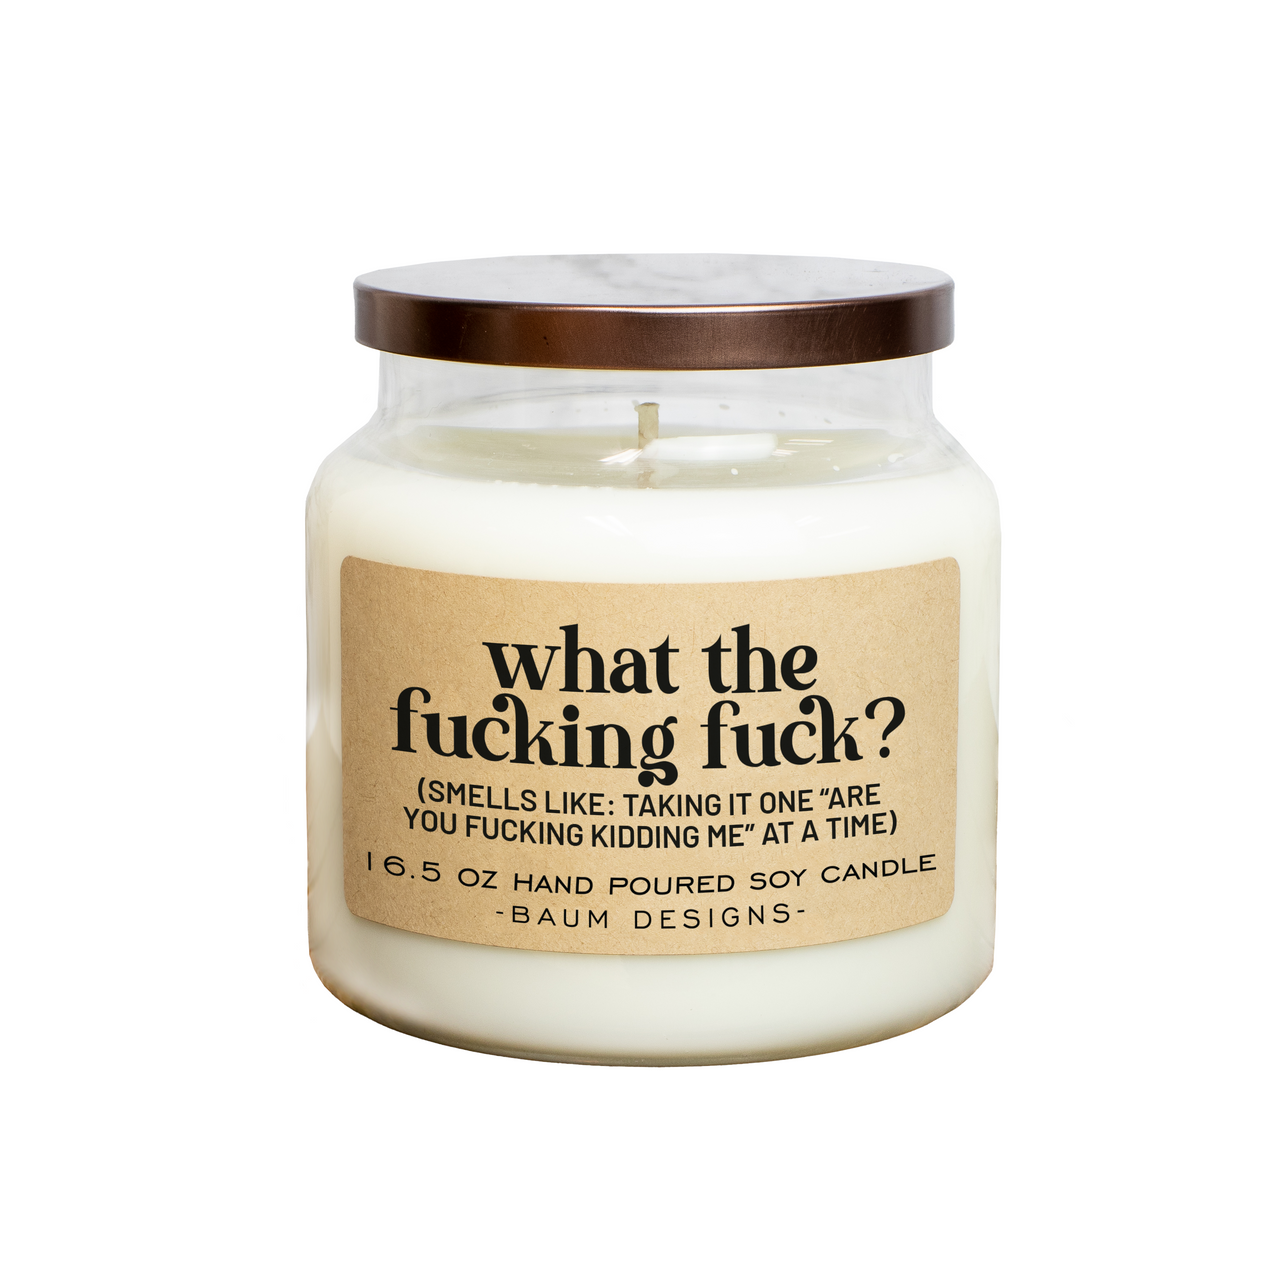 What The Fucking Fuck Soy Candle Baum Designs